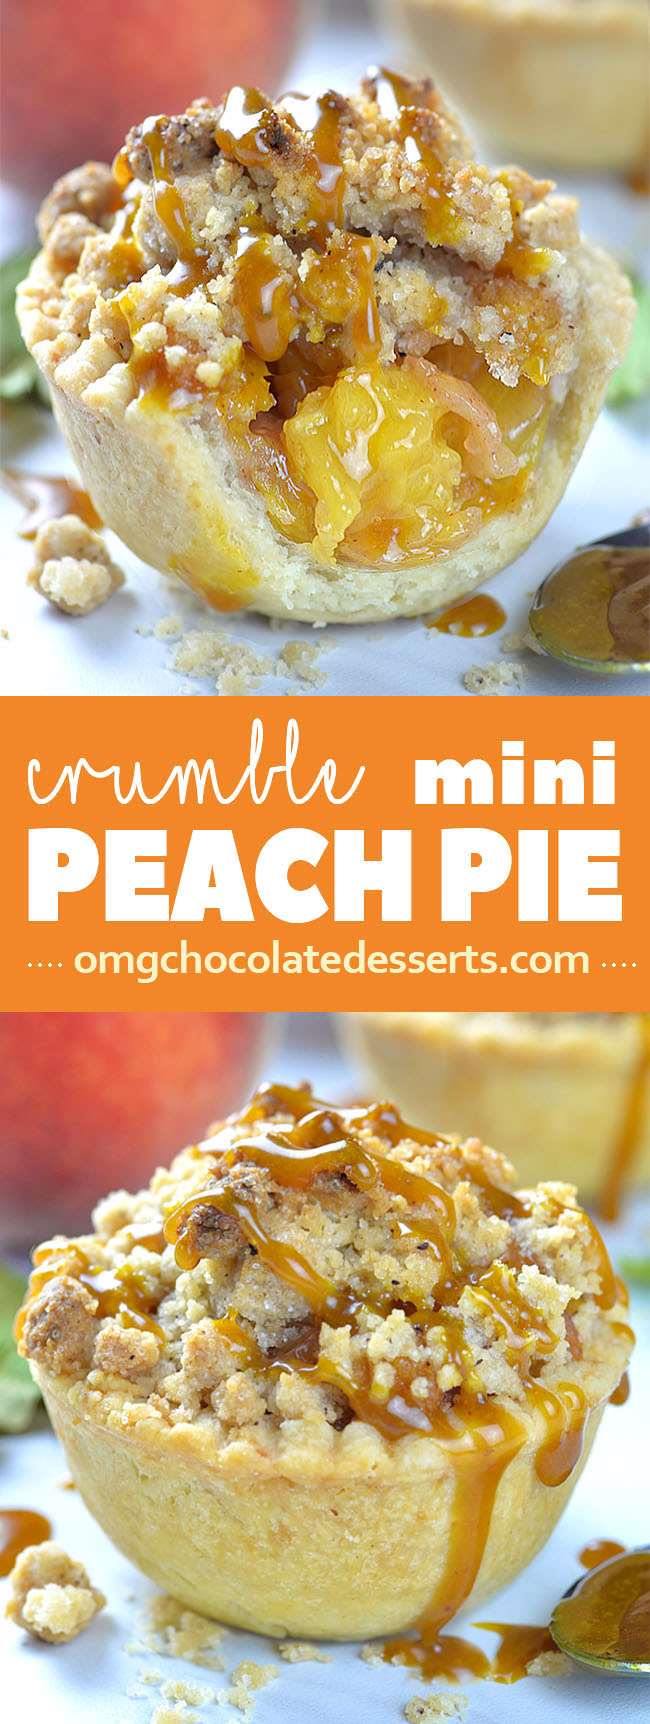 Crumble Mini Peach Pie is individual portion of delicious crumble pie loaded with fresh peaches and caramel sauce.